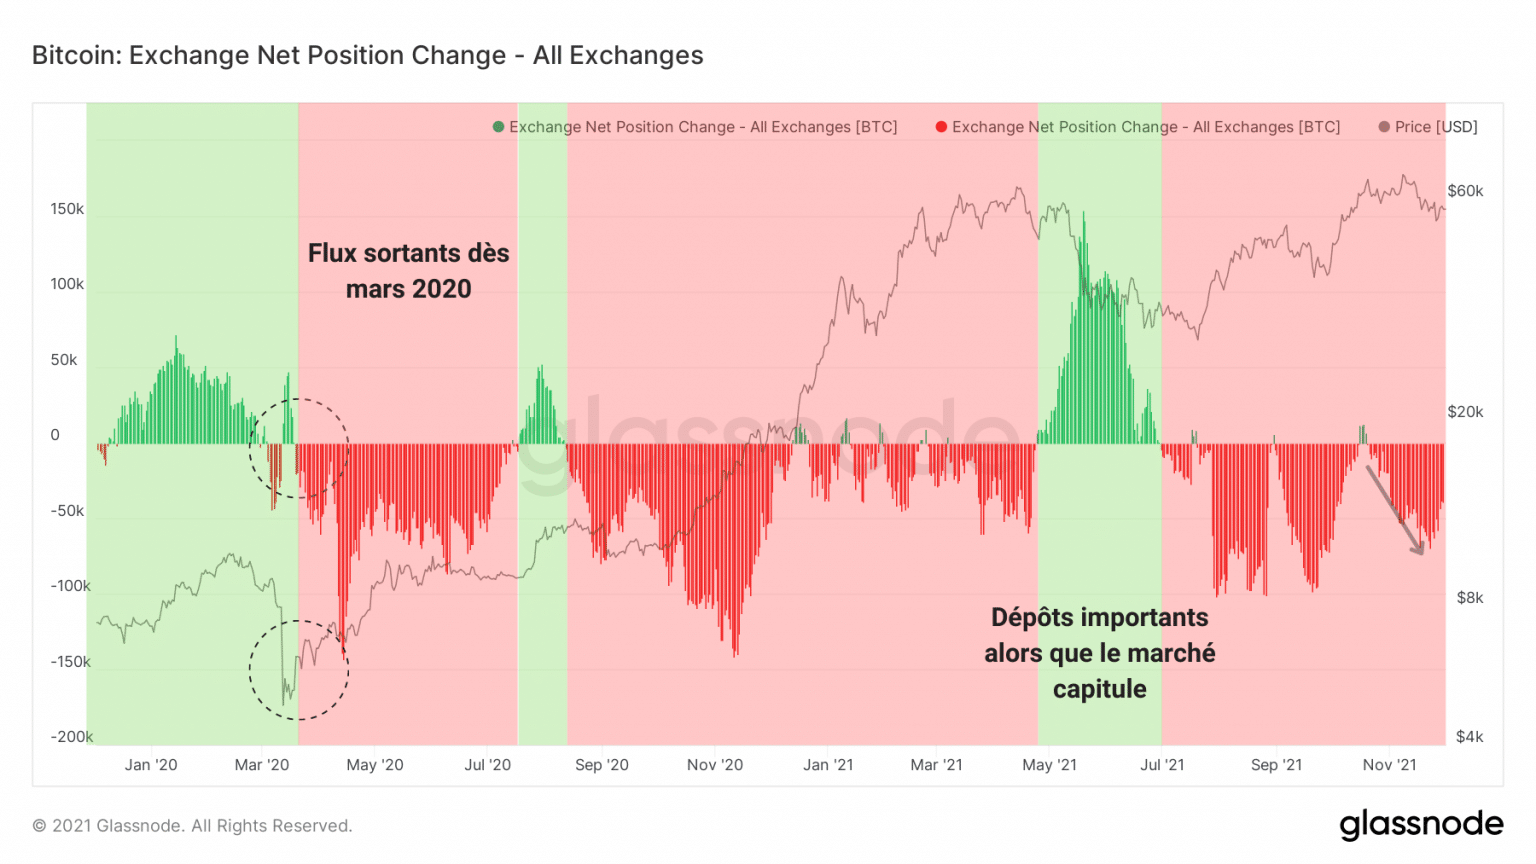 Chart of change in net position of exchanges (Source: Glassnode)